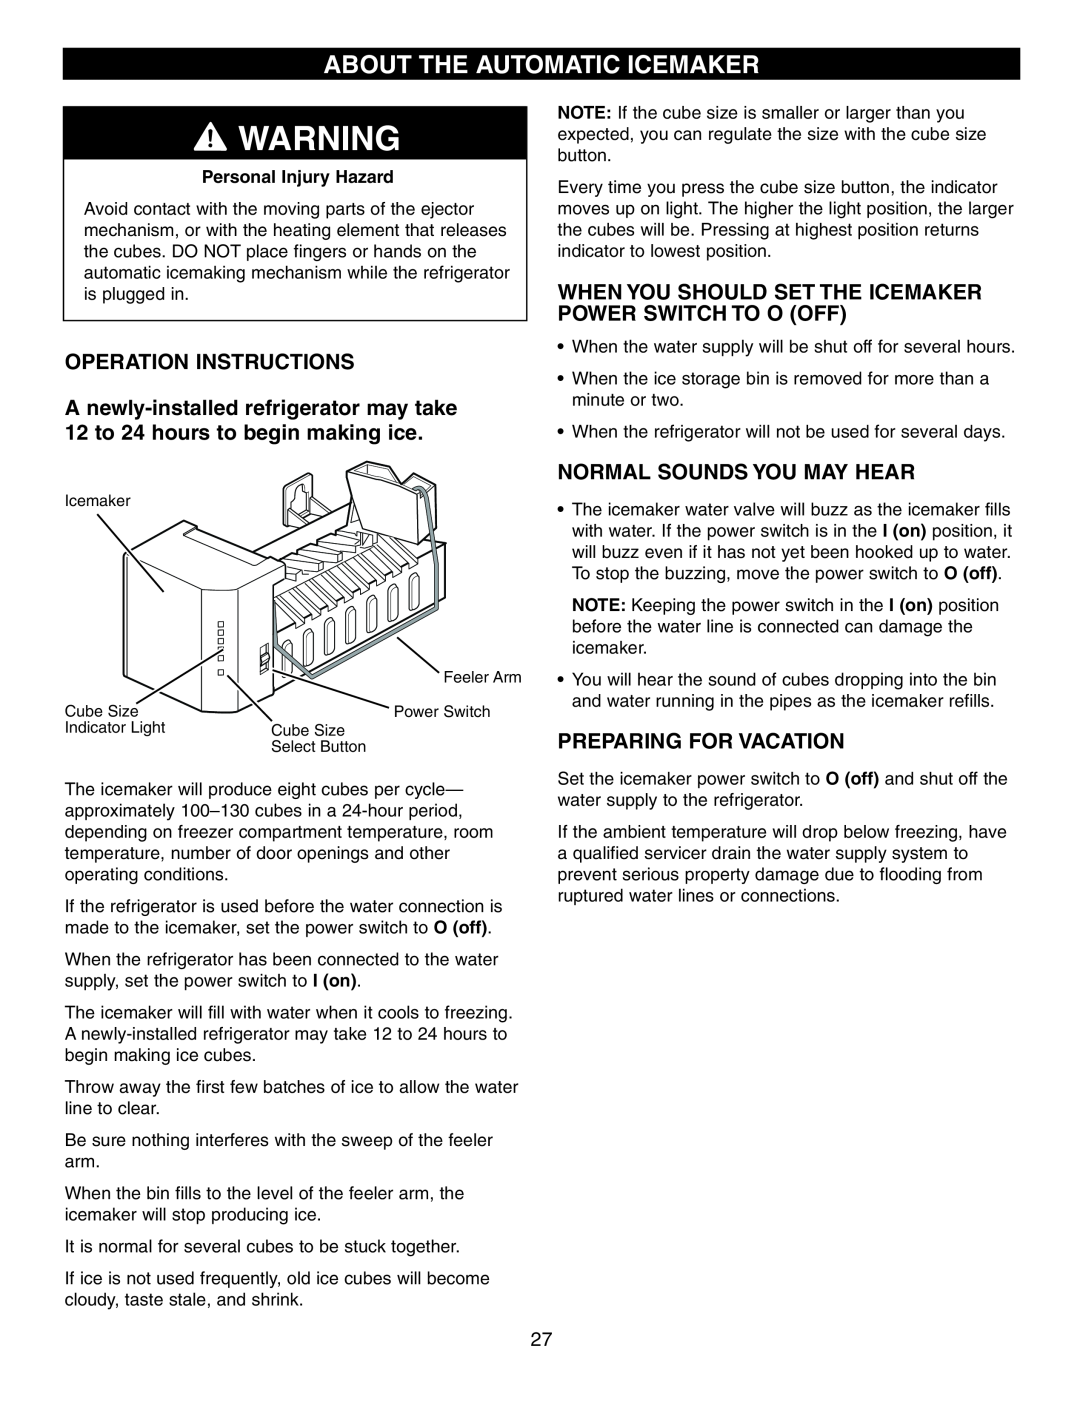 LG Electronics LRFD21855, LRFD25850 manual About The Automatic Icemaker, Operation Instructions, Normal Sounds You May Hear 